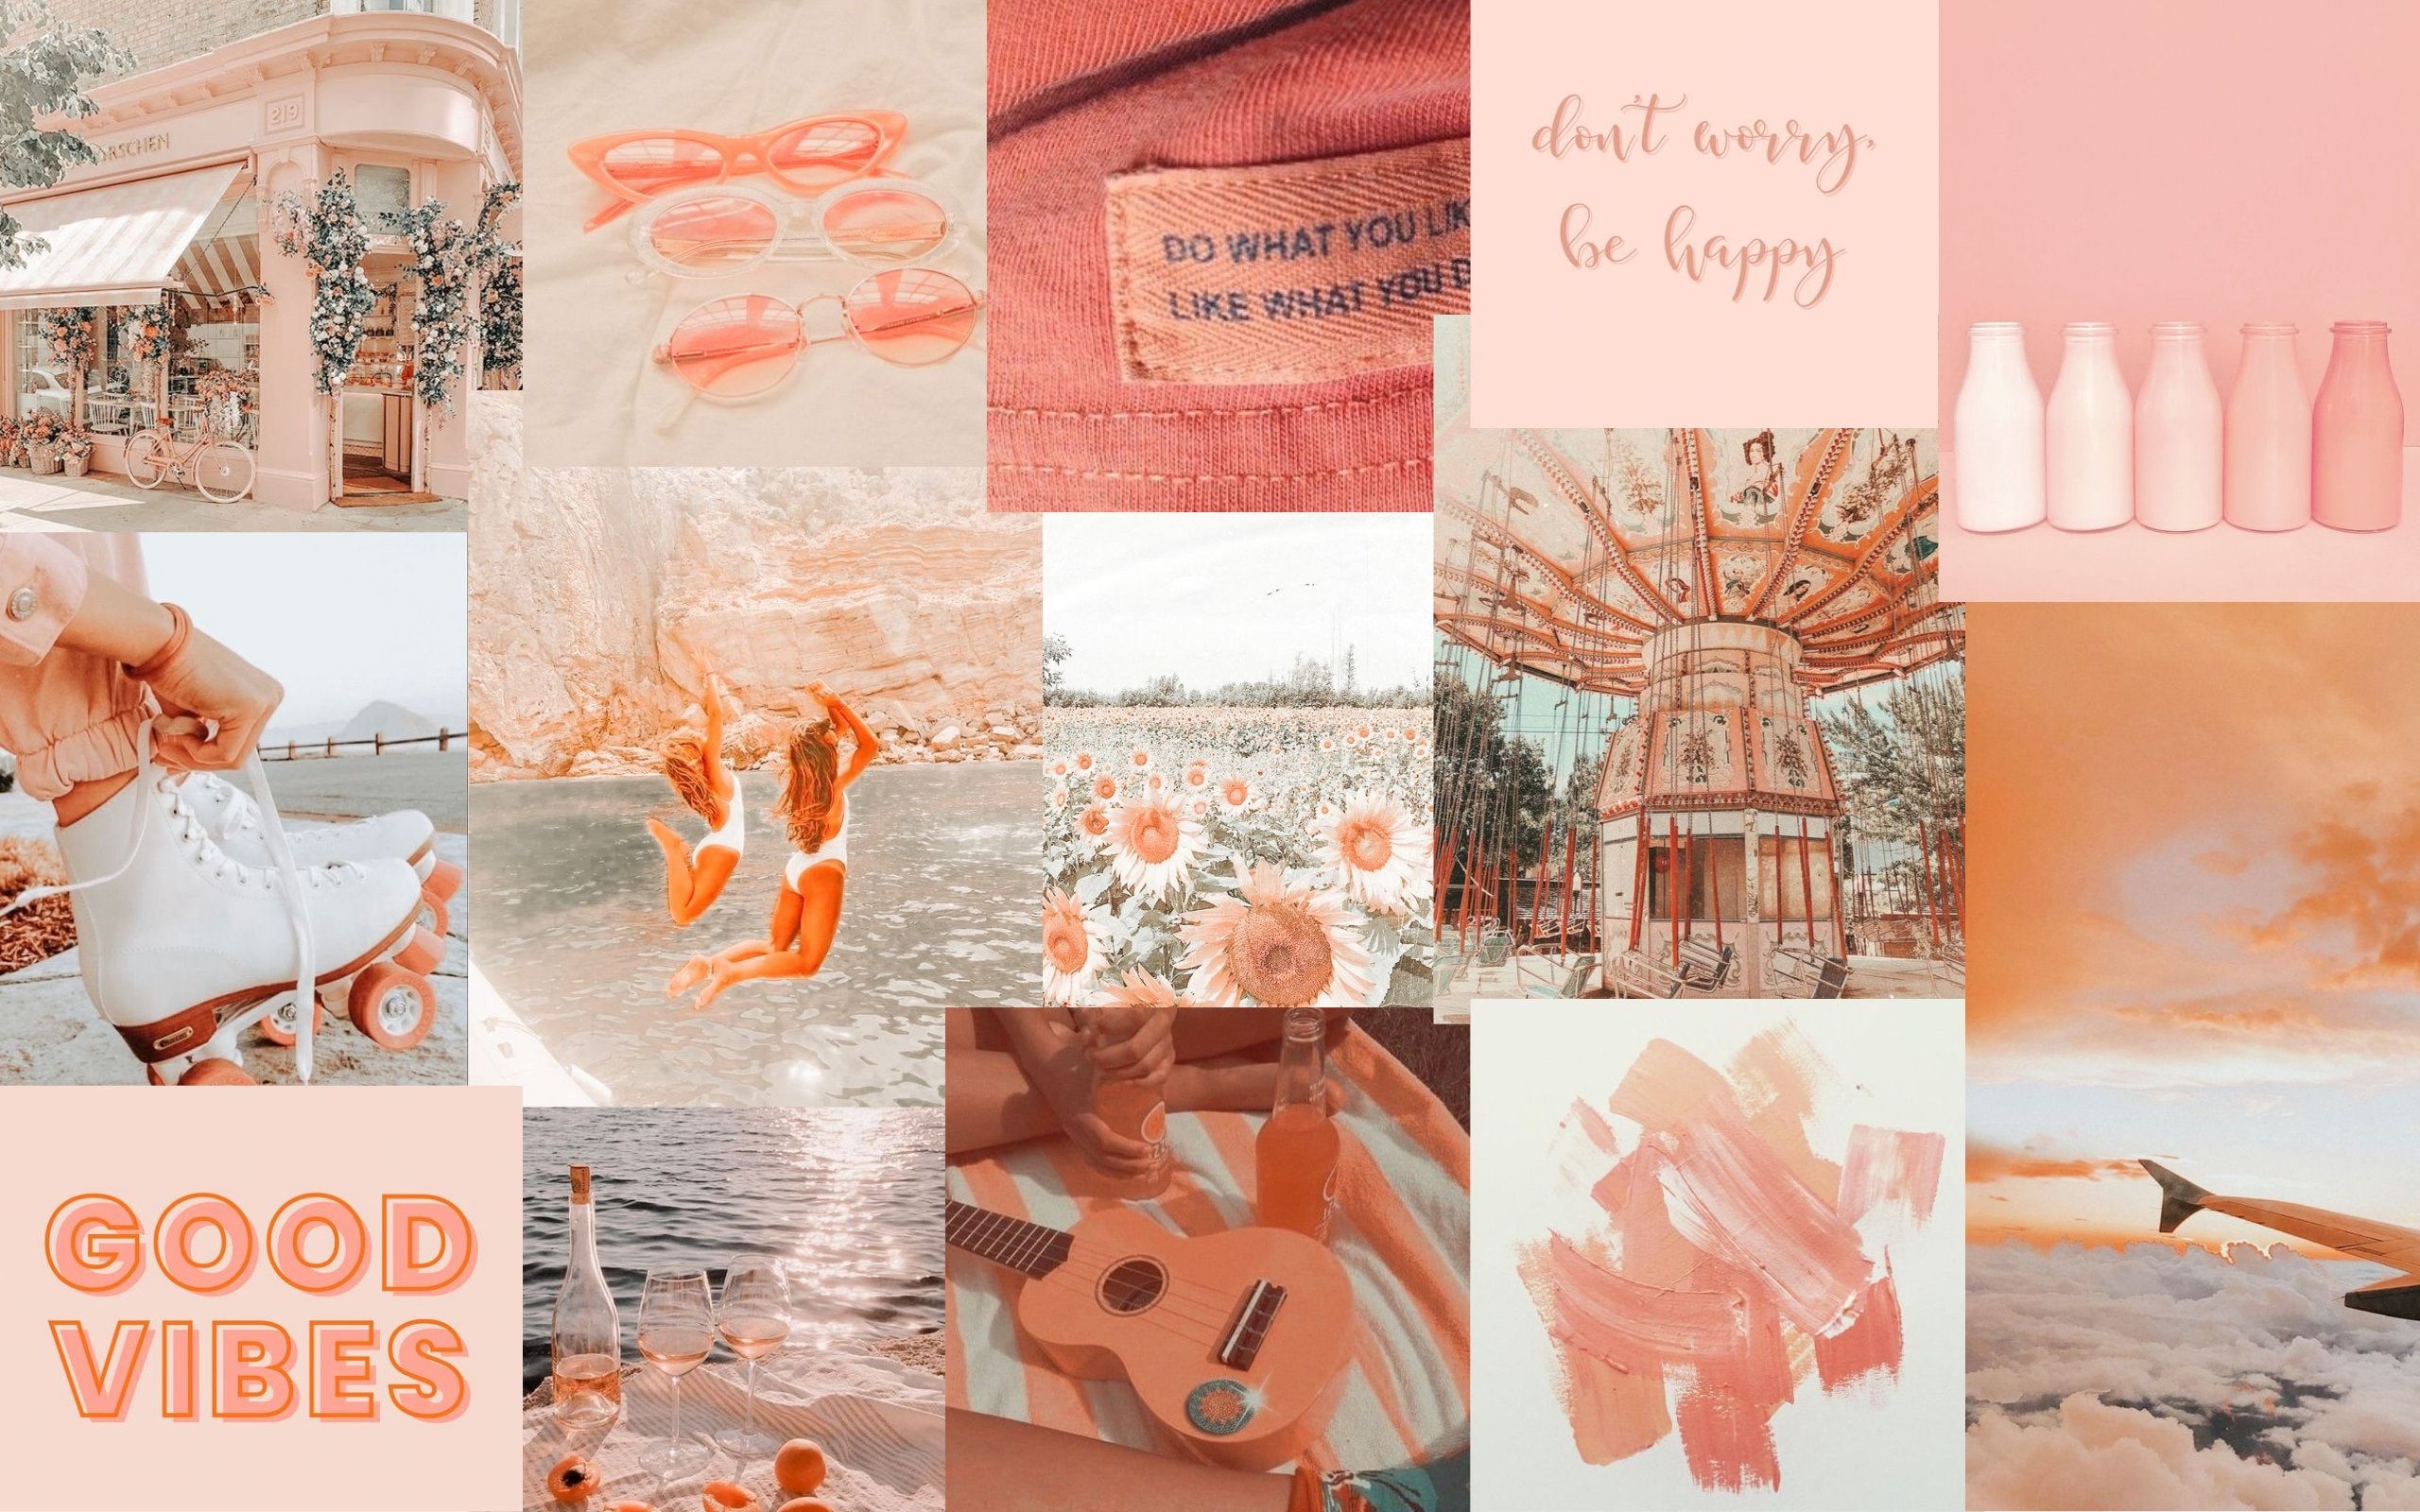 A collage of photos including a rollercoaster, a pink and white wall, and the words 